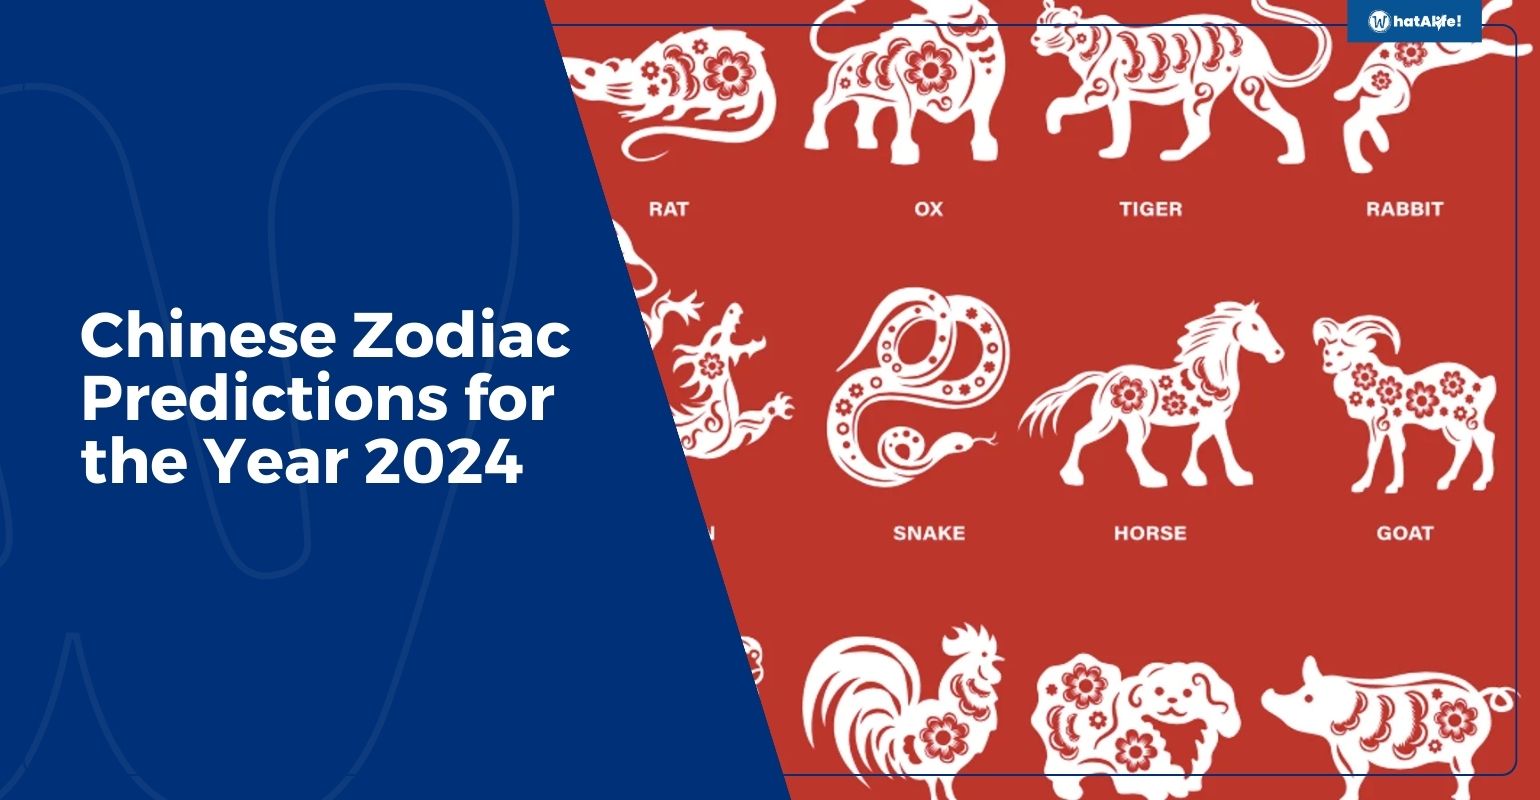 Chinese Zodiac Predictions for the Year 2024